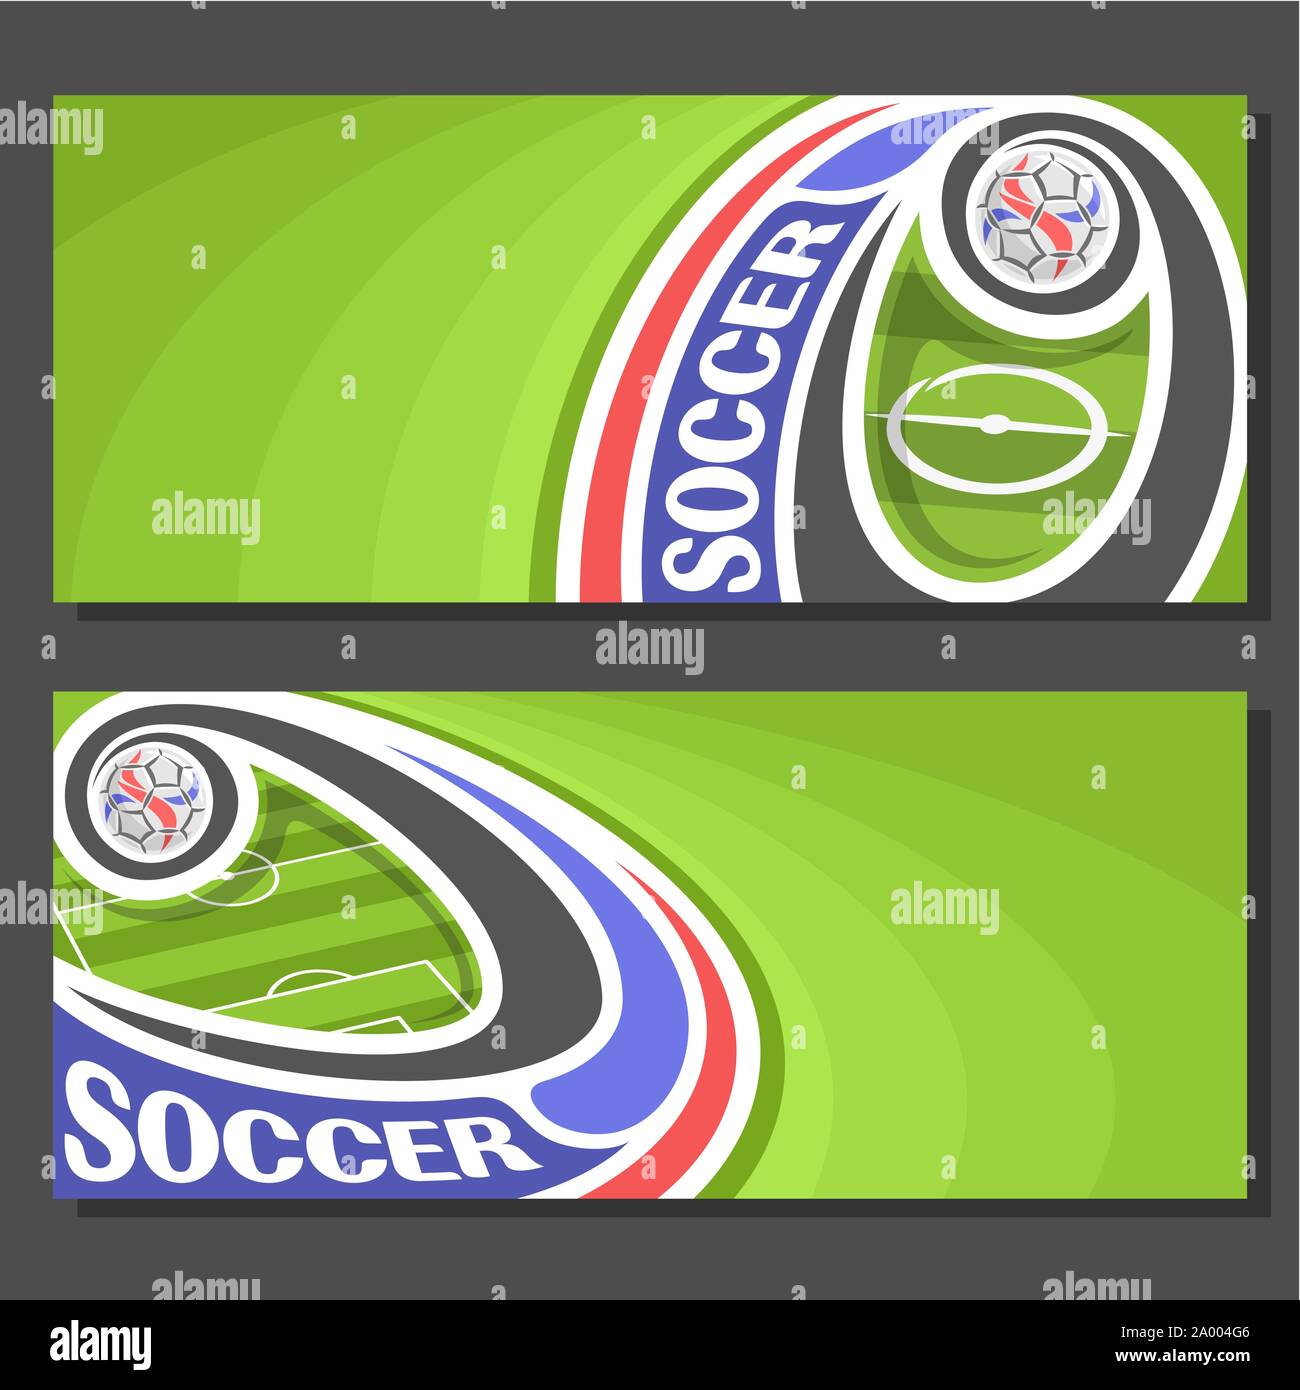 Vector Banners for Soccer: 2 layouts for title on soccer theme, green grass football field top view, soccer ball flying on curve trajectory in goal, i Stock Vector